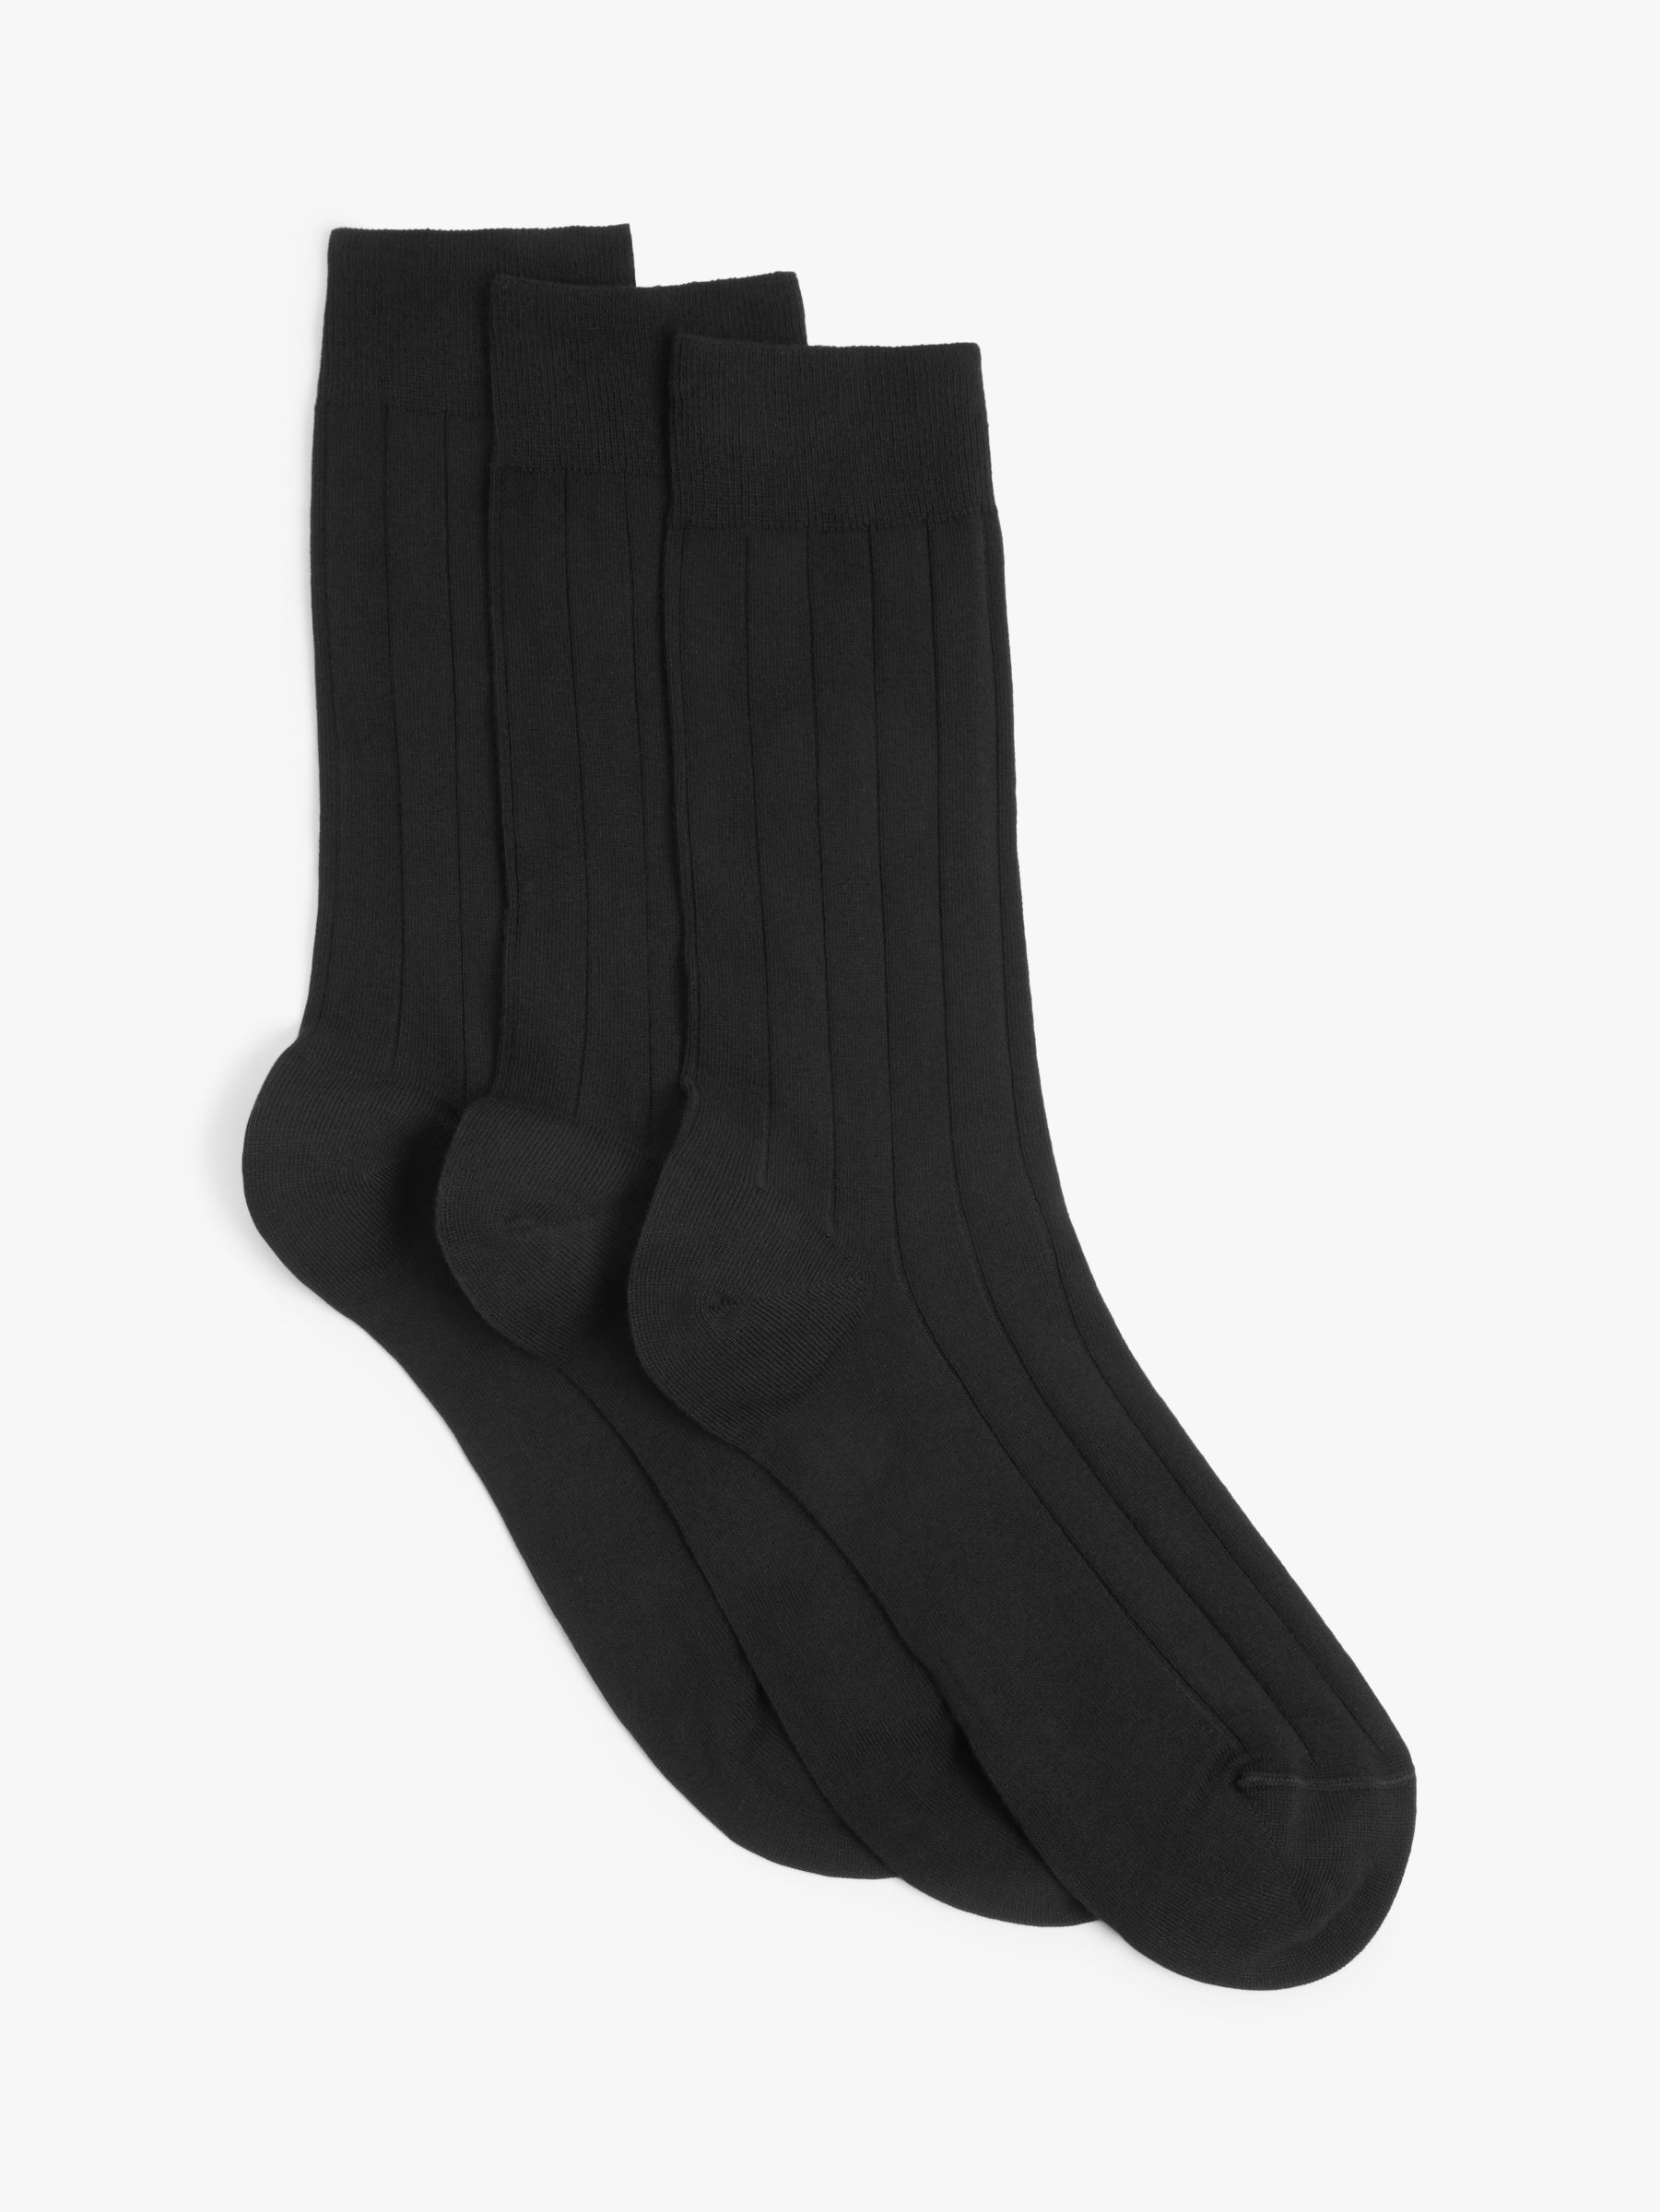 John Lewis Made in Italy Cotton Socks, Pack of 3, Black, S